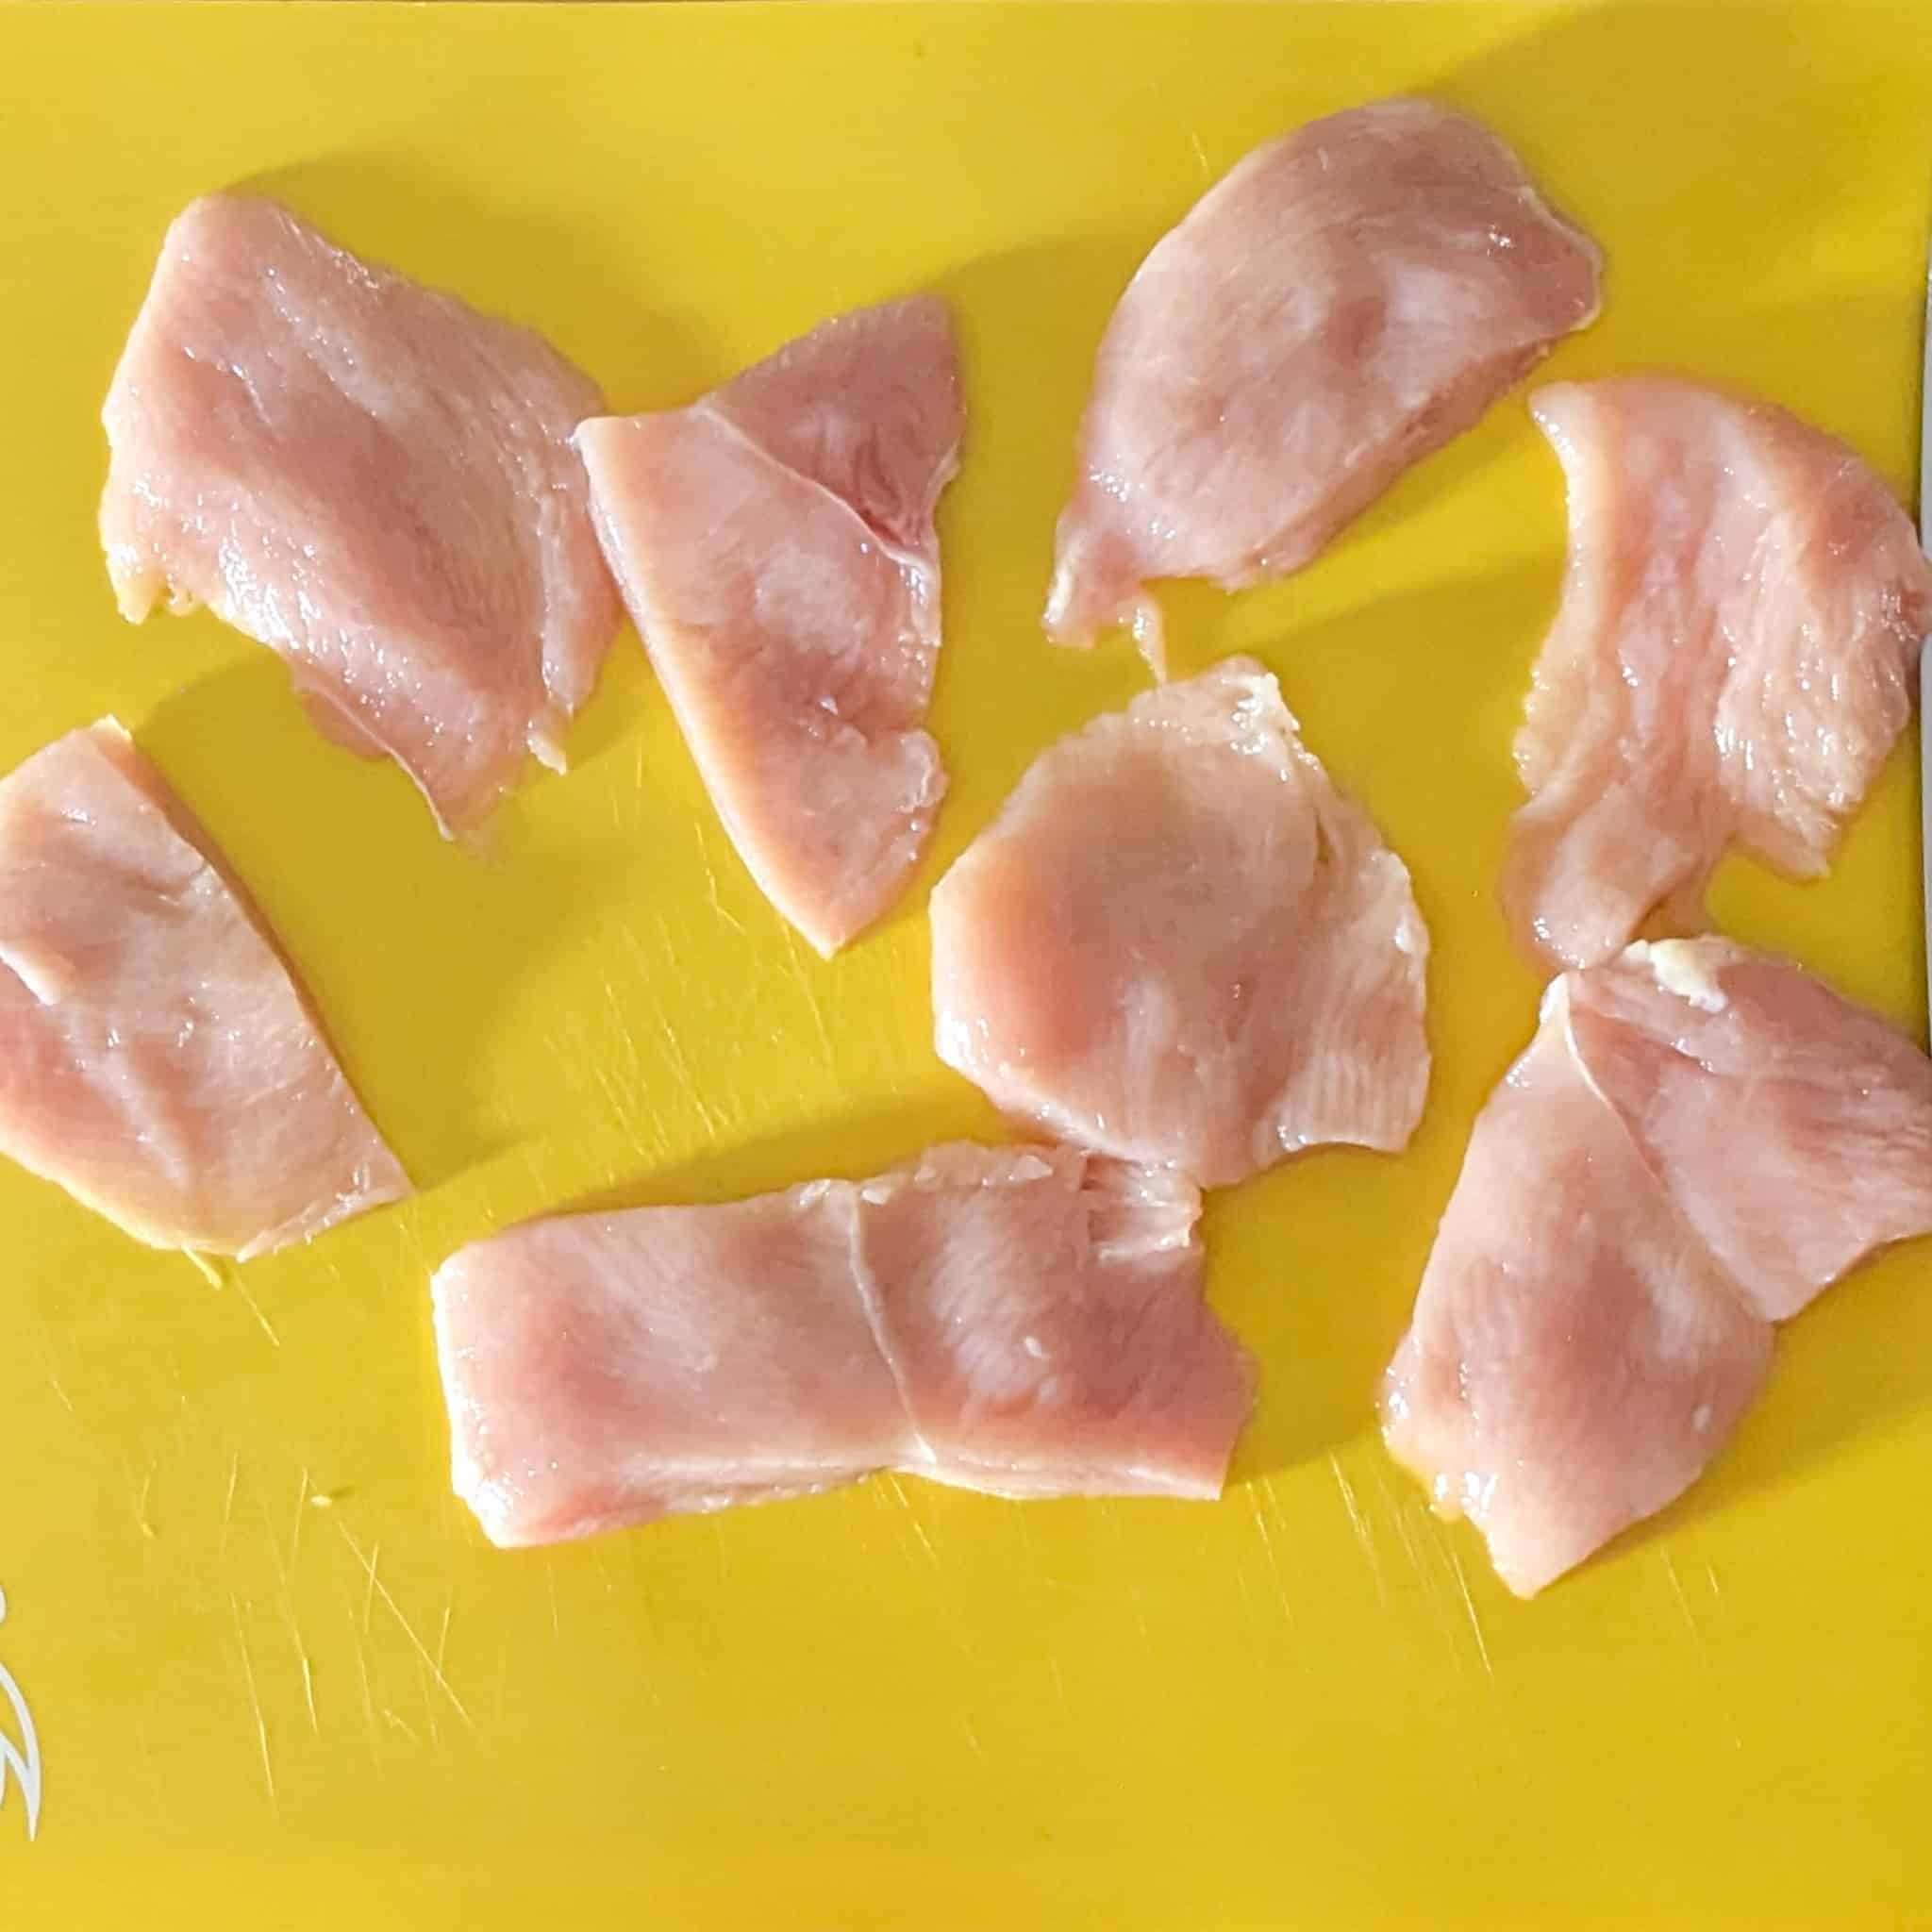 small chicken cutlet pieces on a cutting board